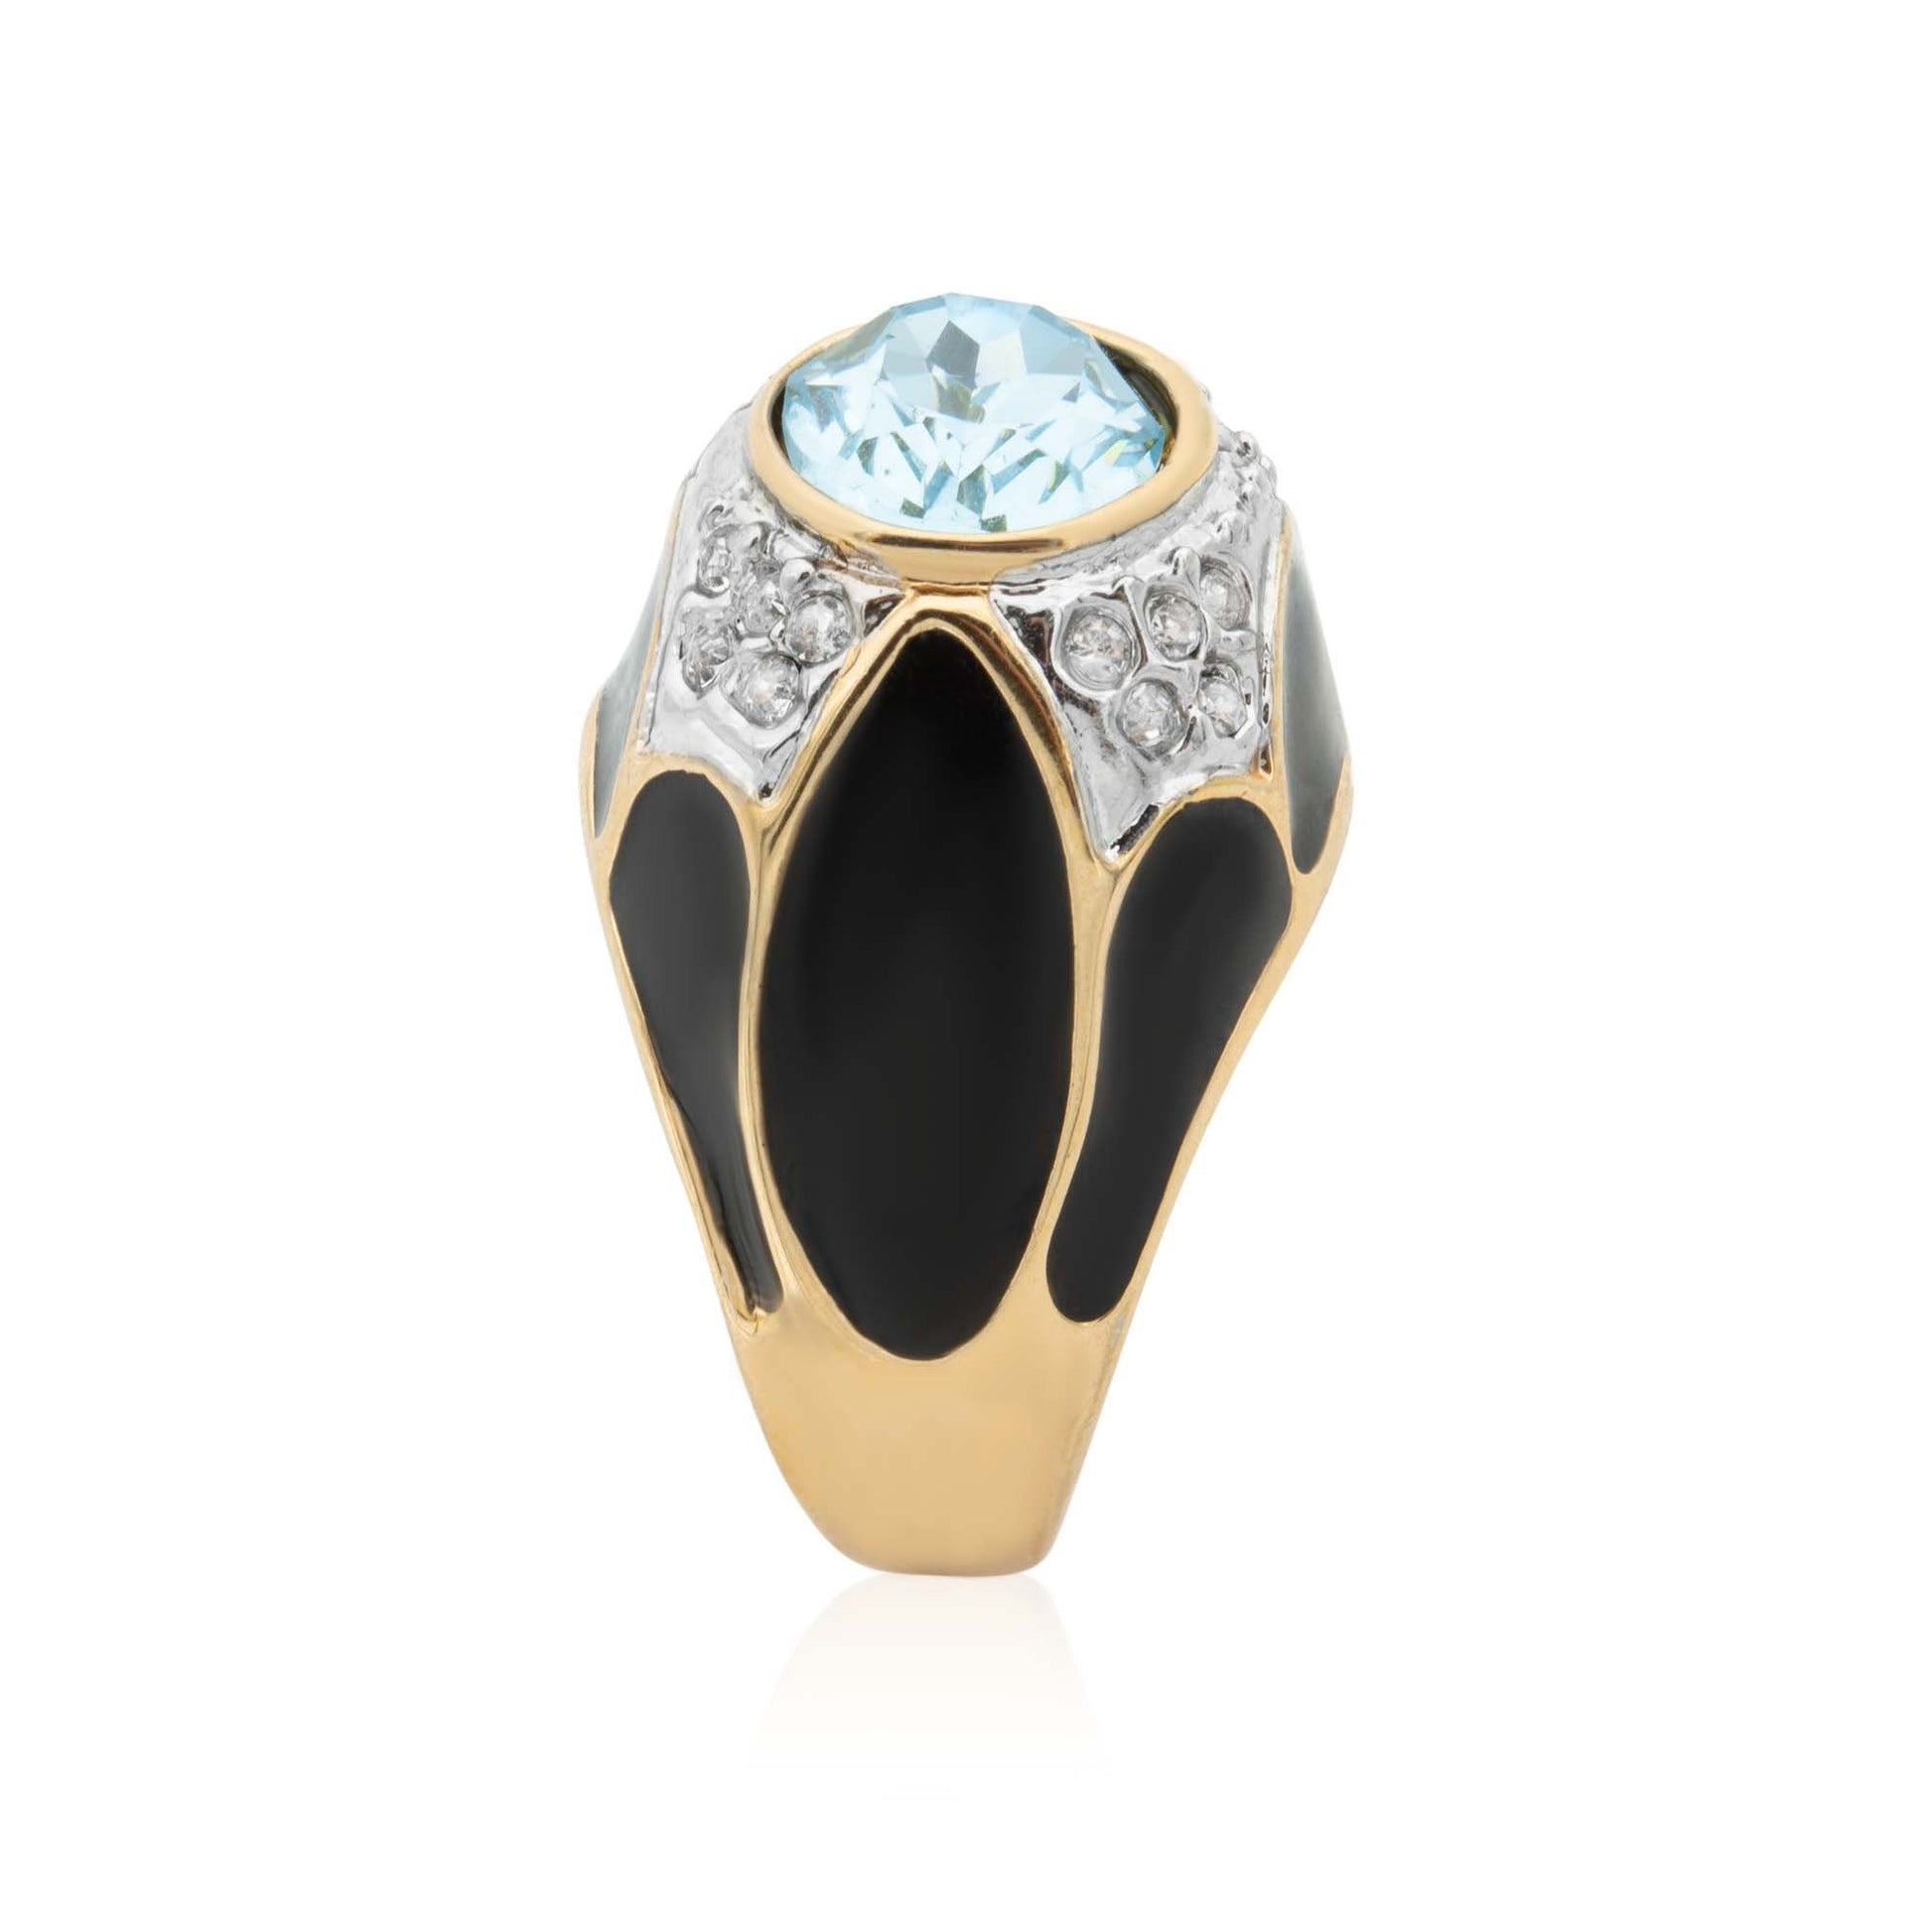 Vintage Ring 1980s Black Enamel Ring with Aquamarine Surrounded by Clear Crystals R2094 - Limited Stock - Never Worn